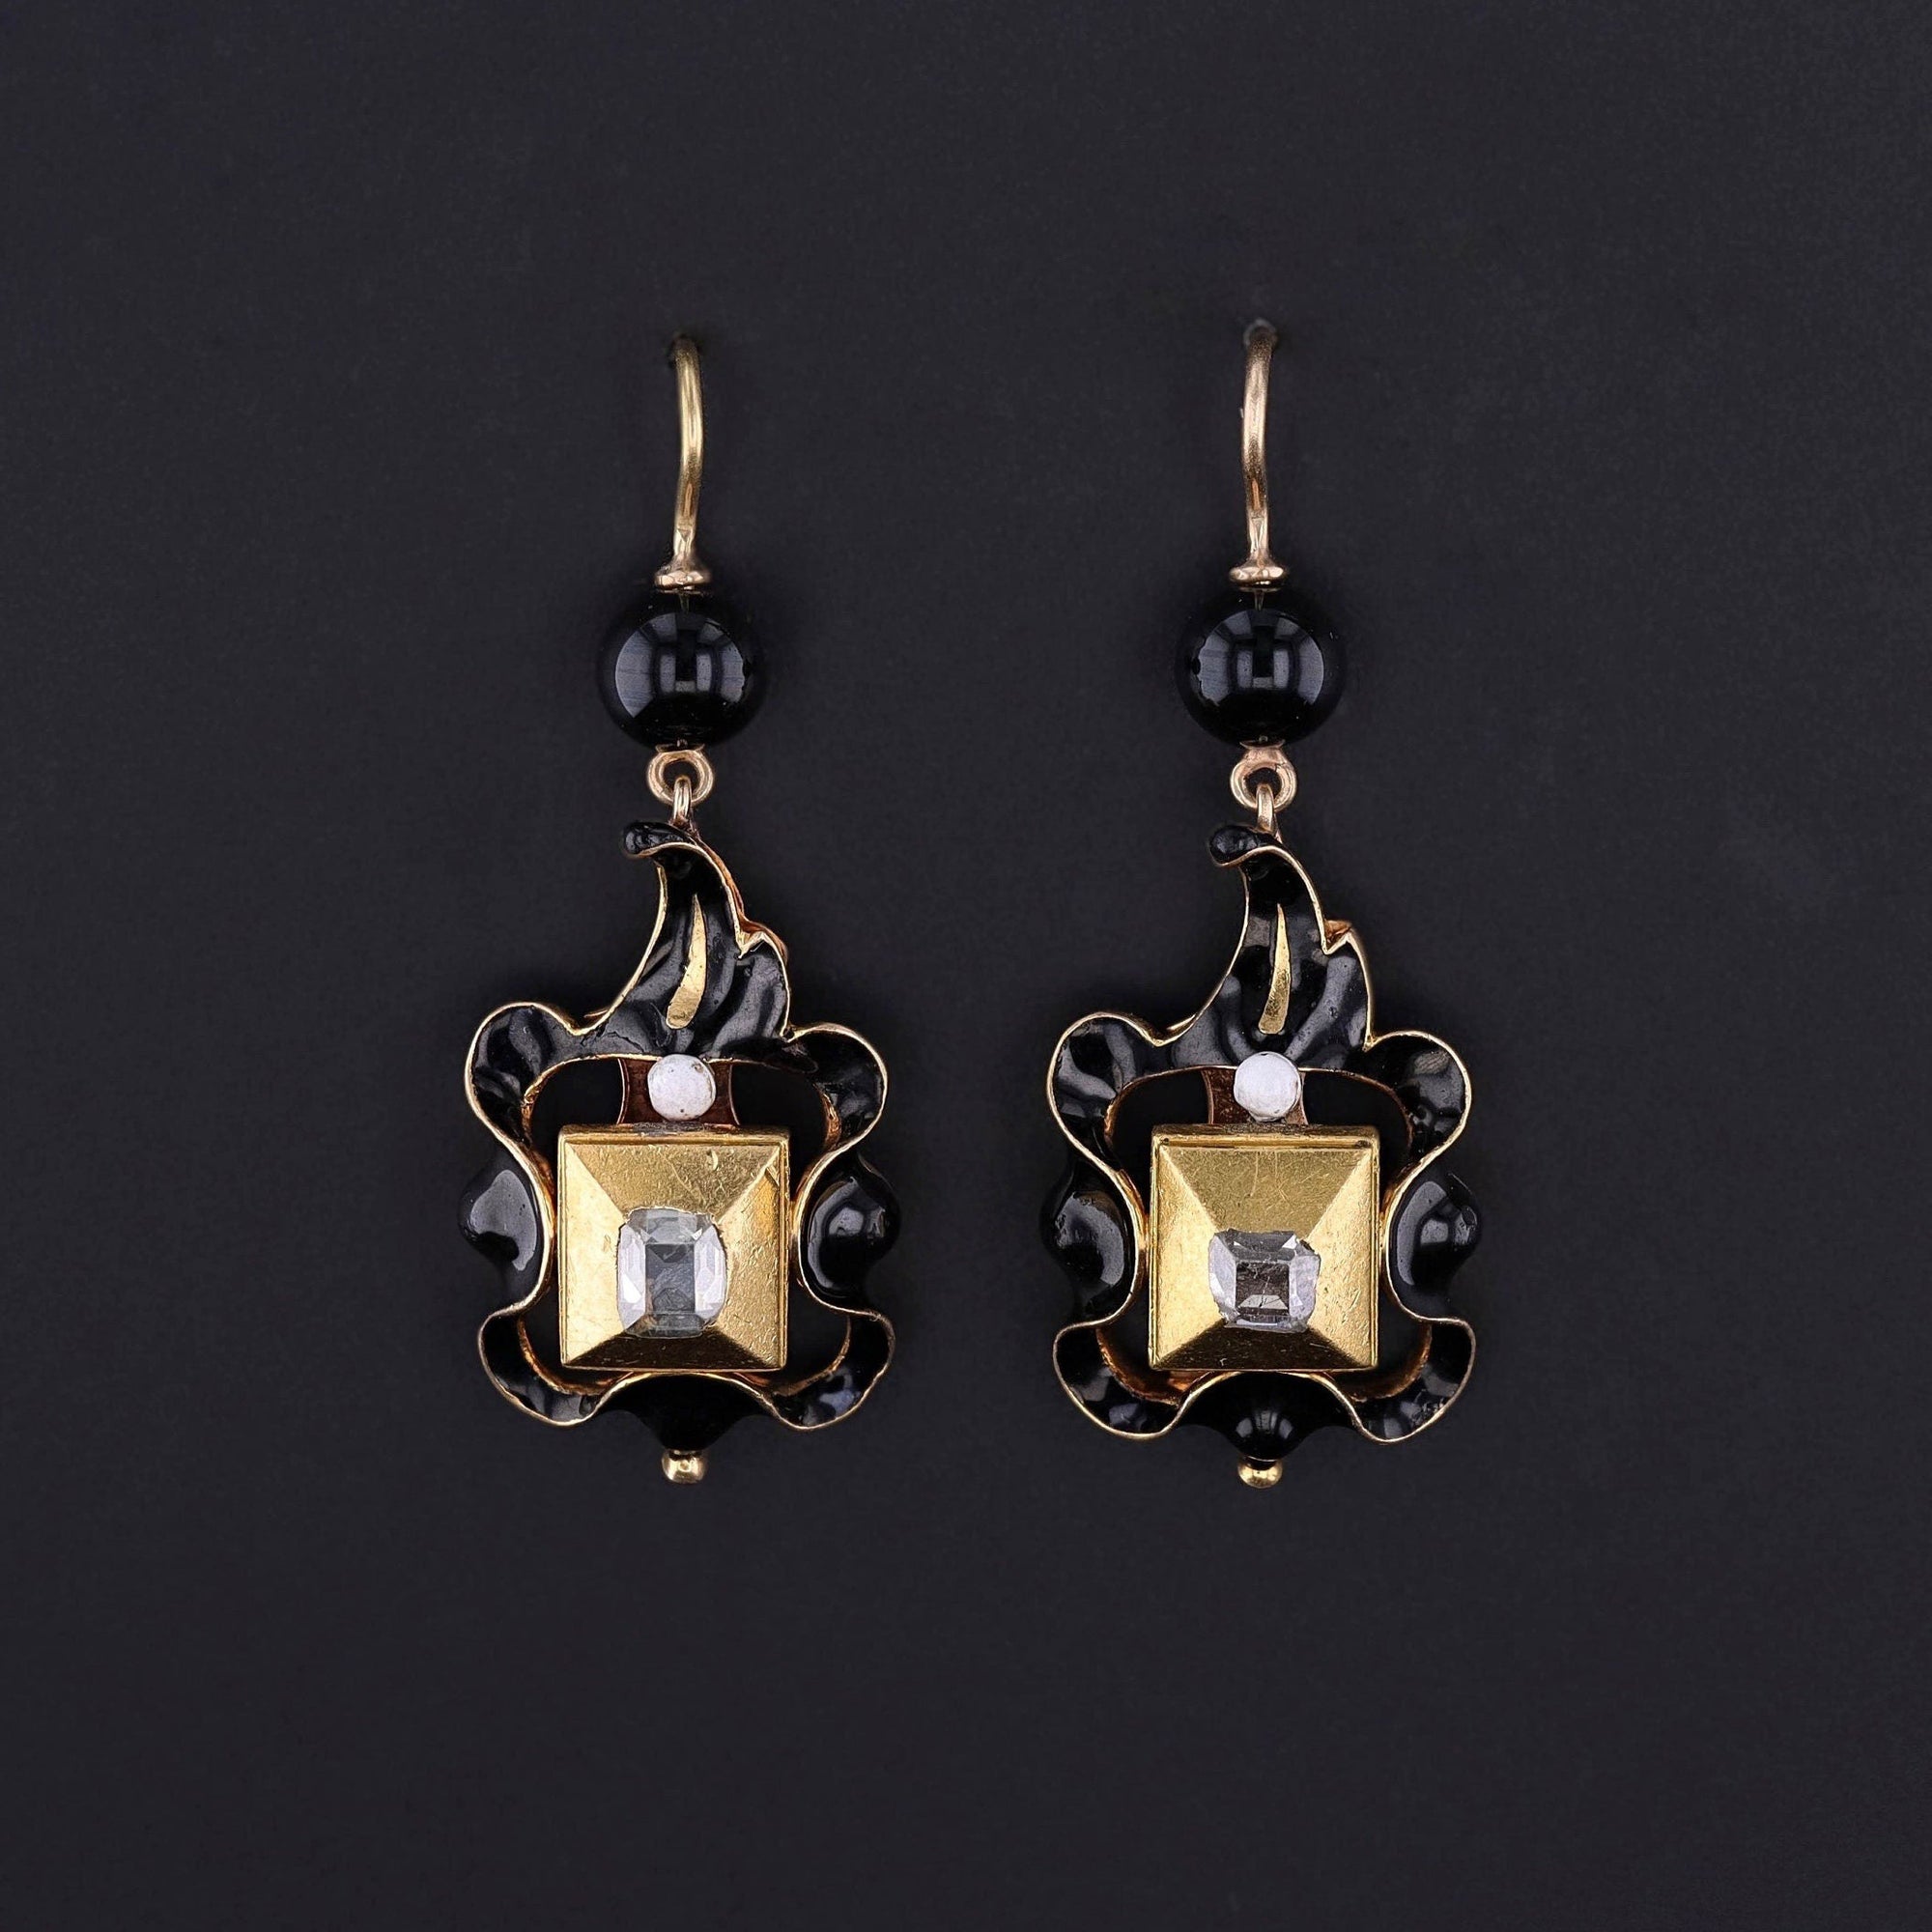 A rare pair of 17th century table cut diamond dangles in 22ct rub over settings with 18k black and white enamel drops, leaded glass bead surmounts, and 14k gold ear wires.